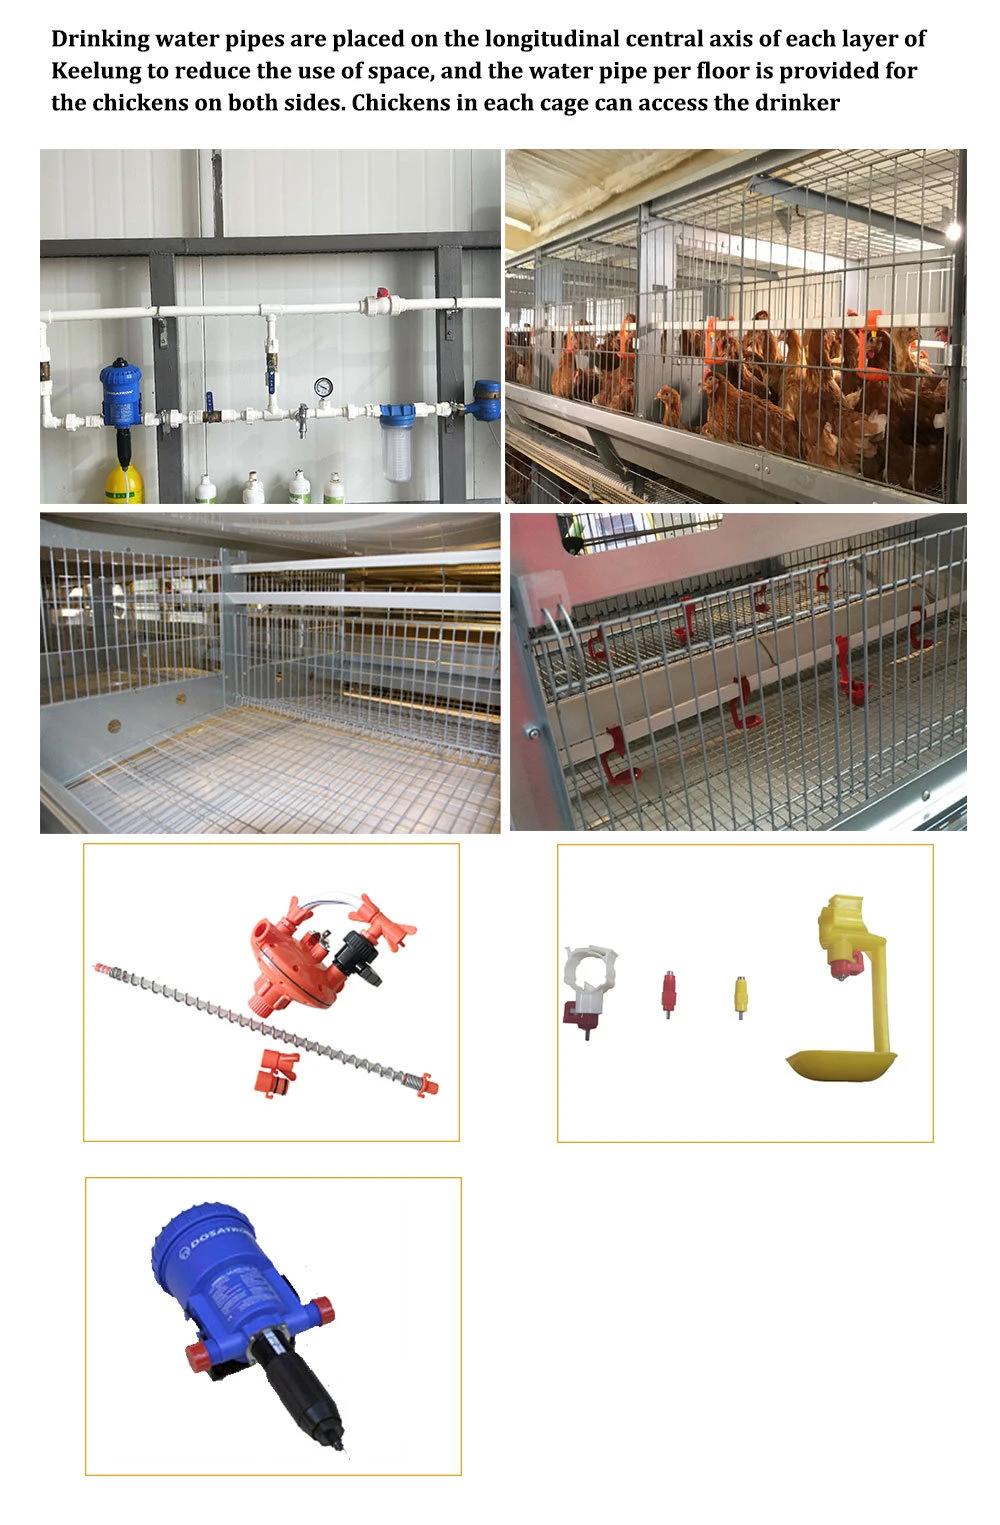 Prefab/Prefabricated Steel Structure Duck/Chicken House with Equipment